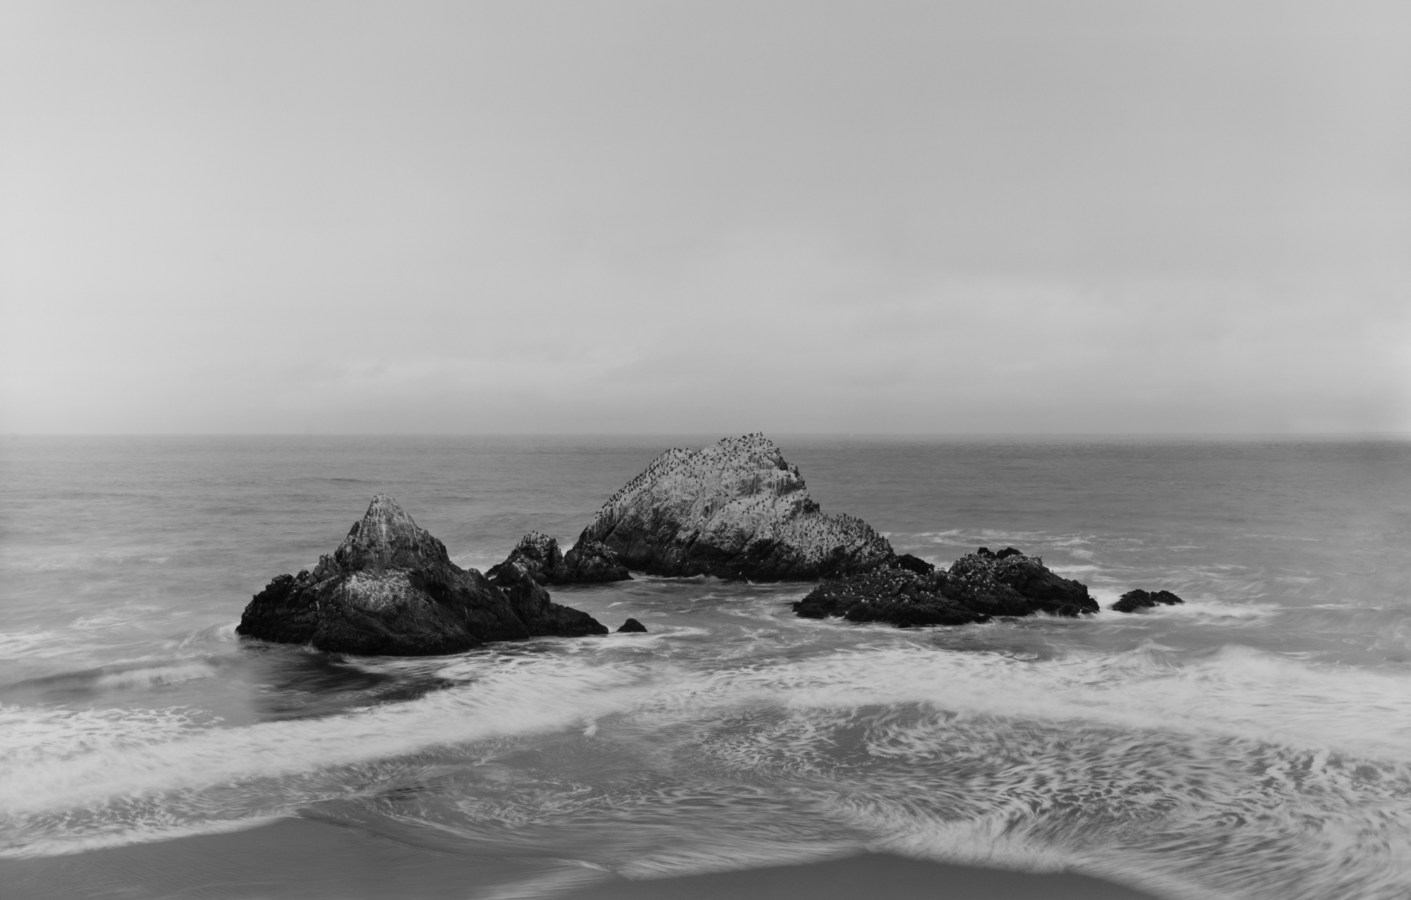 Black and white horizontal photograph of a rock formation in the Pacific Ocean